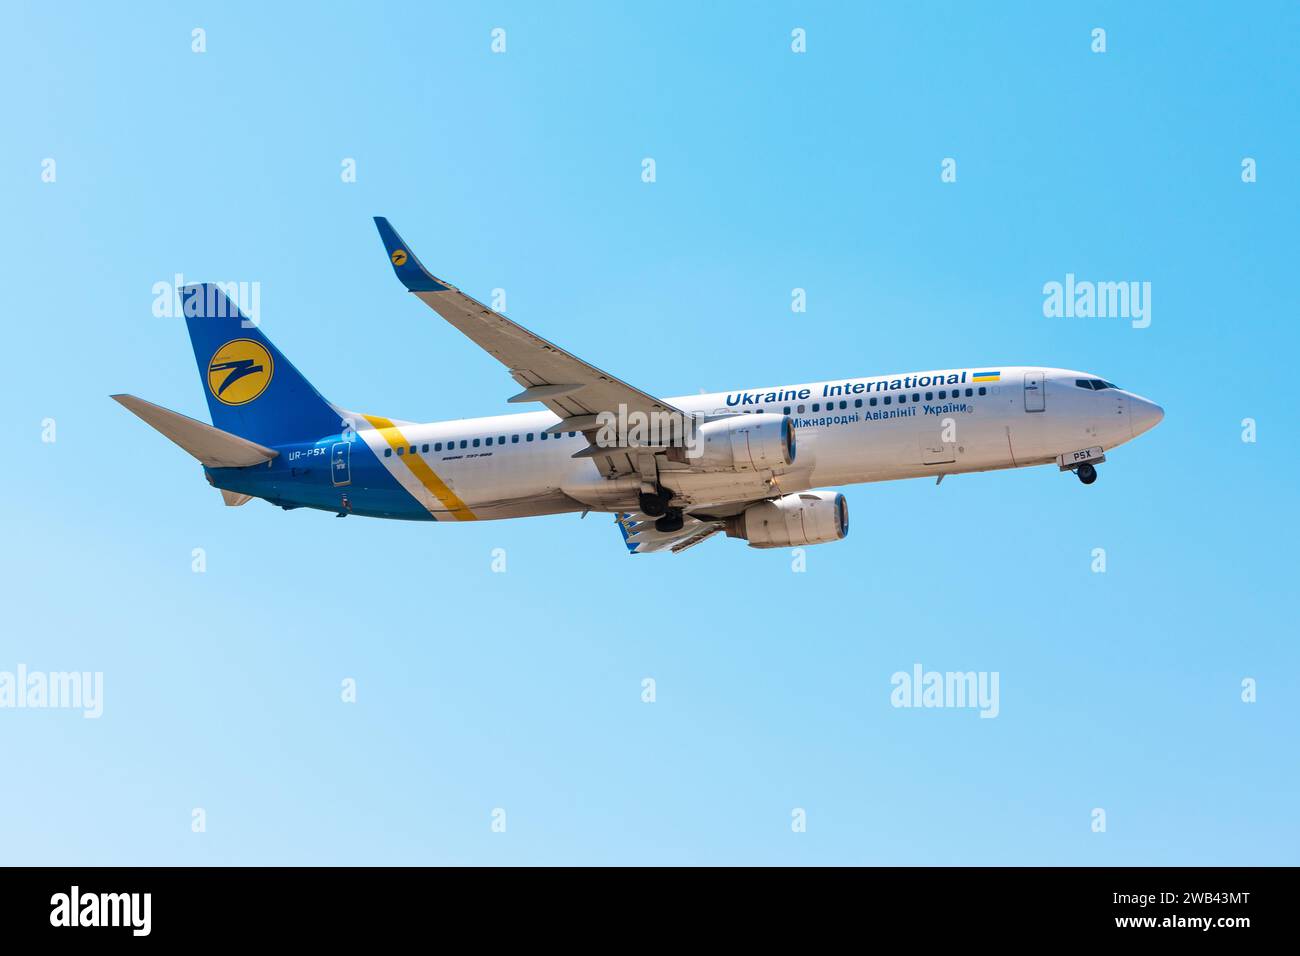 Boryspil, Ukraine - August 24, 2019: Airplane Boeing 737-800 (UR-PSX) of Ukraine International Airlines is taking-off from Boryspil Airport Stock Photo